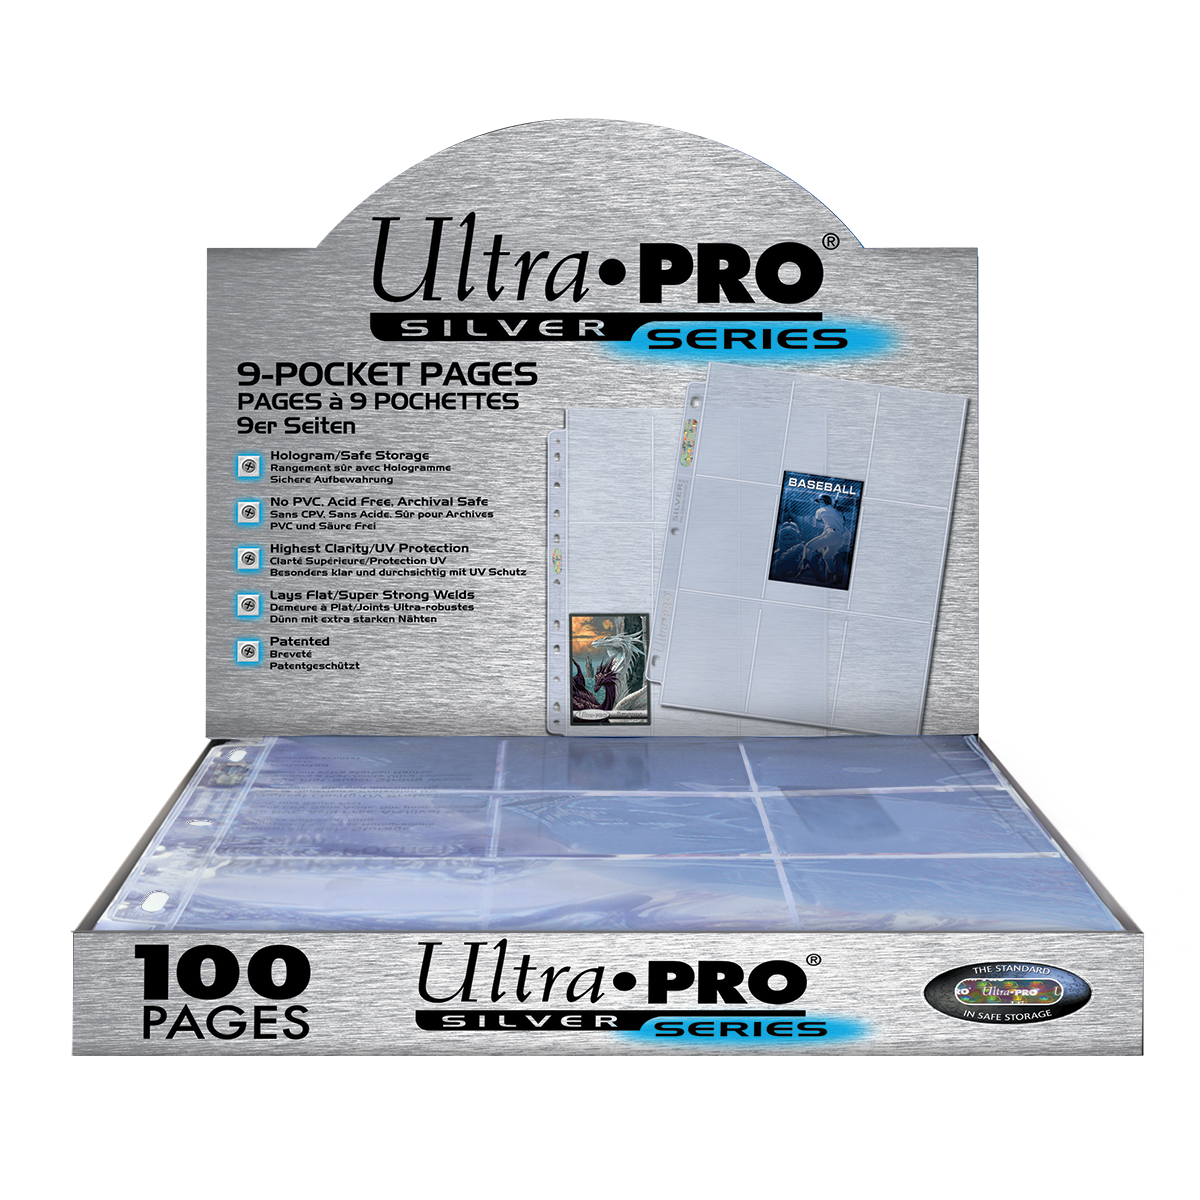 Ultra Pro sleeves - Platinum - Premium card sleeves 100 * AmassGames *  (click link to see in use) HD 